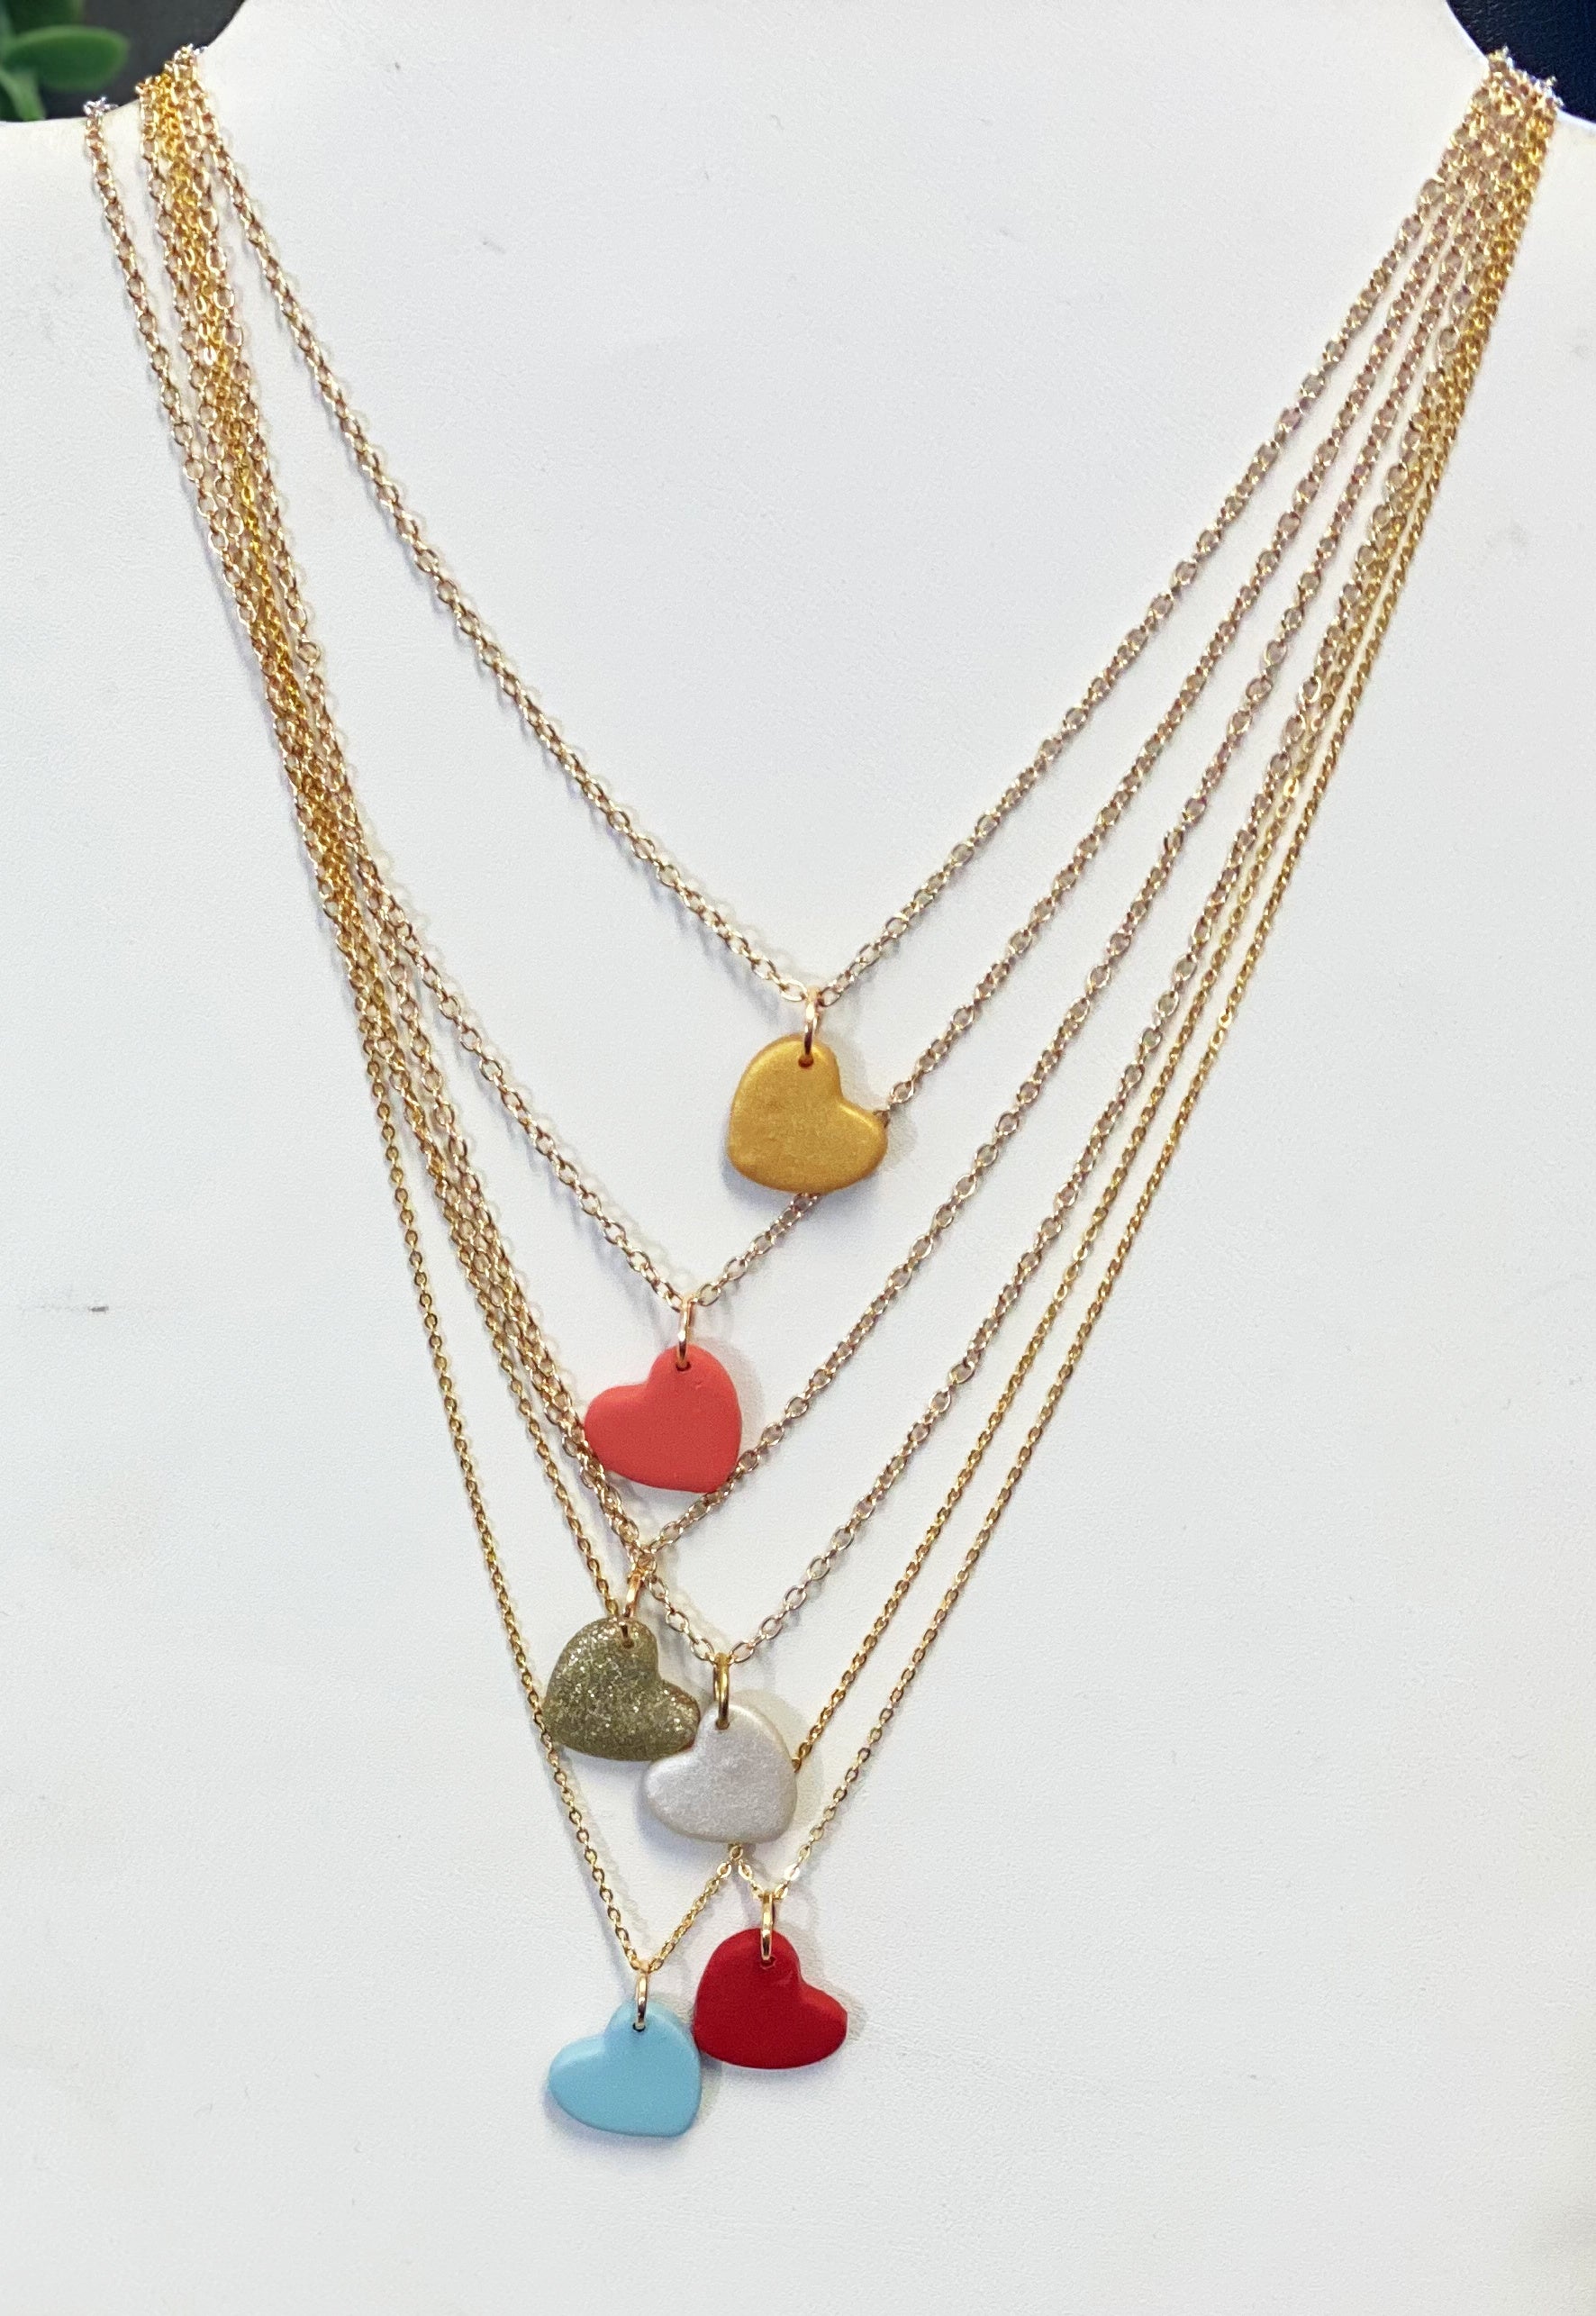 Sweetheart Heart Shaped Necklace